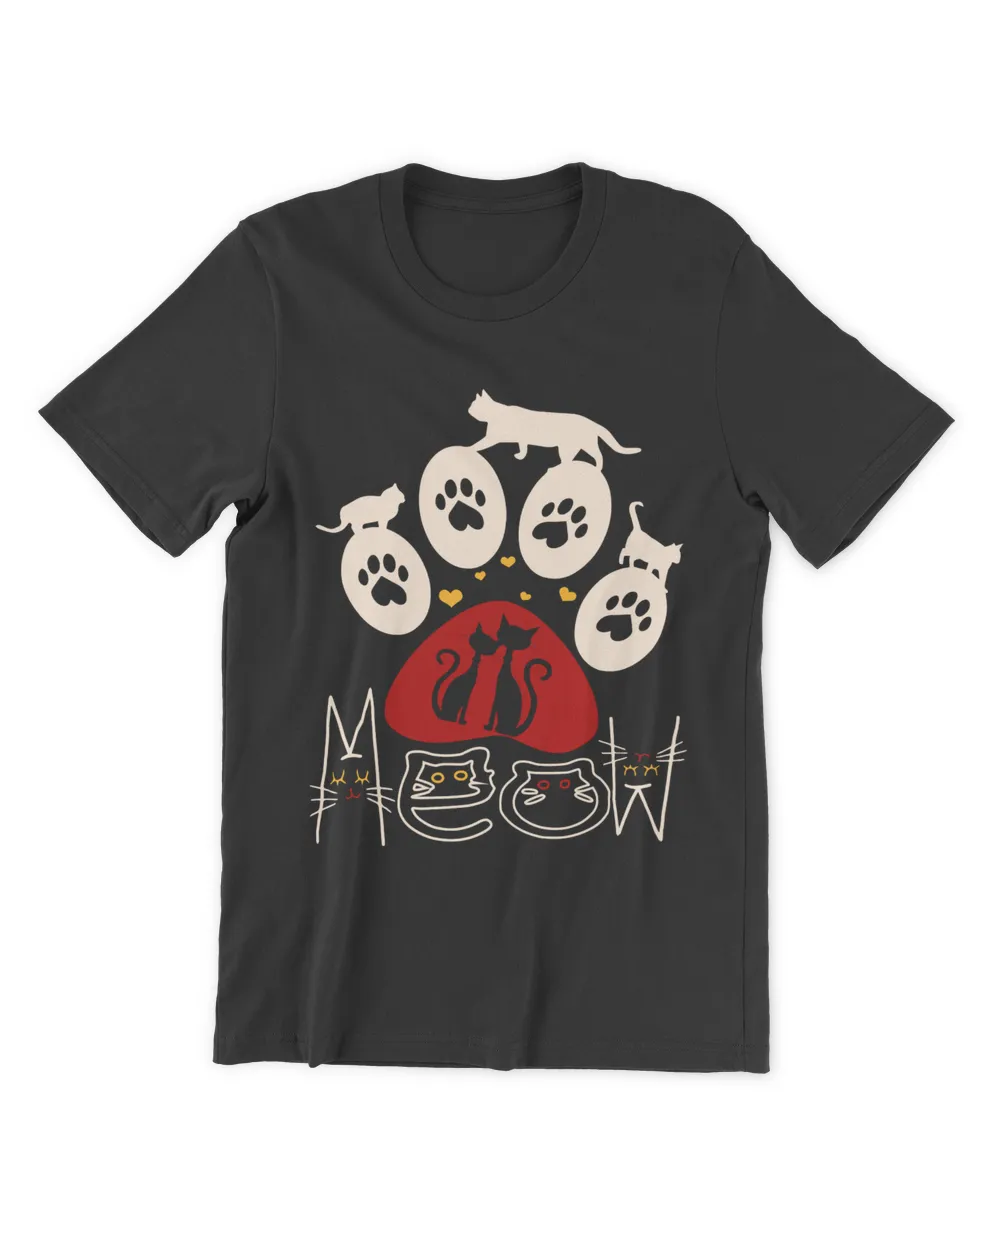 Meow Shirt for Cat Lover Color QTCAT081222A6